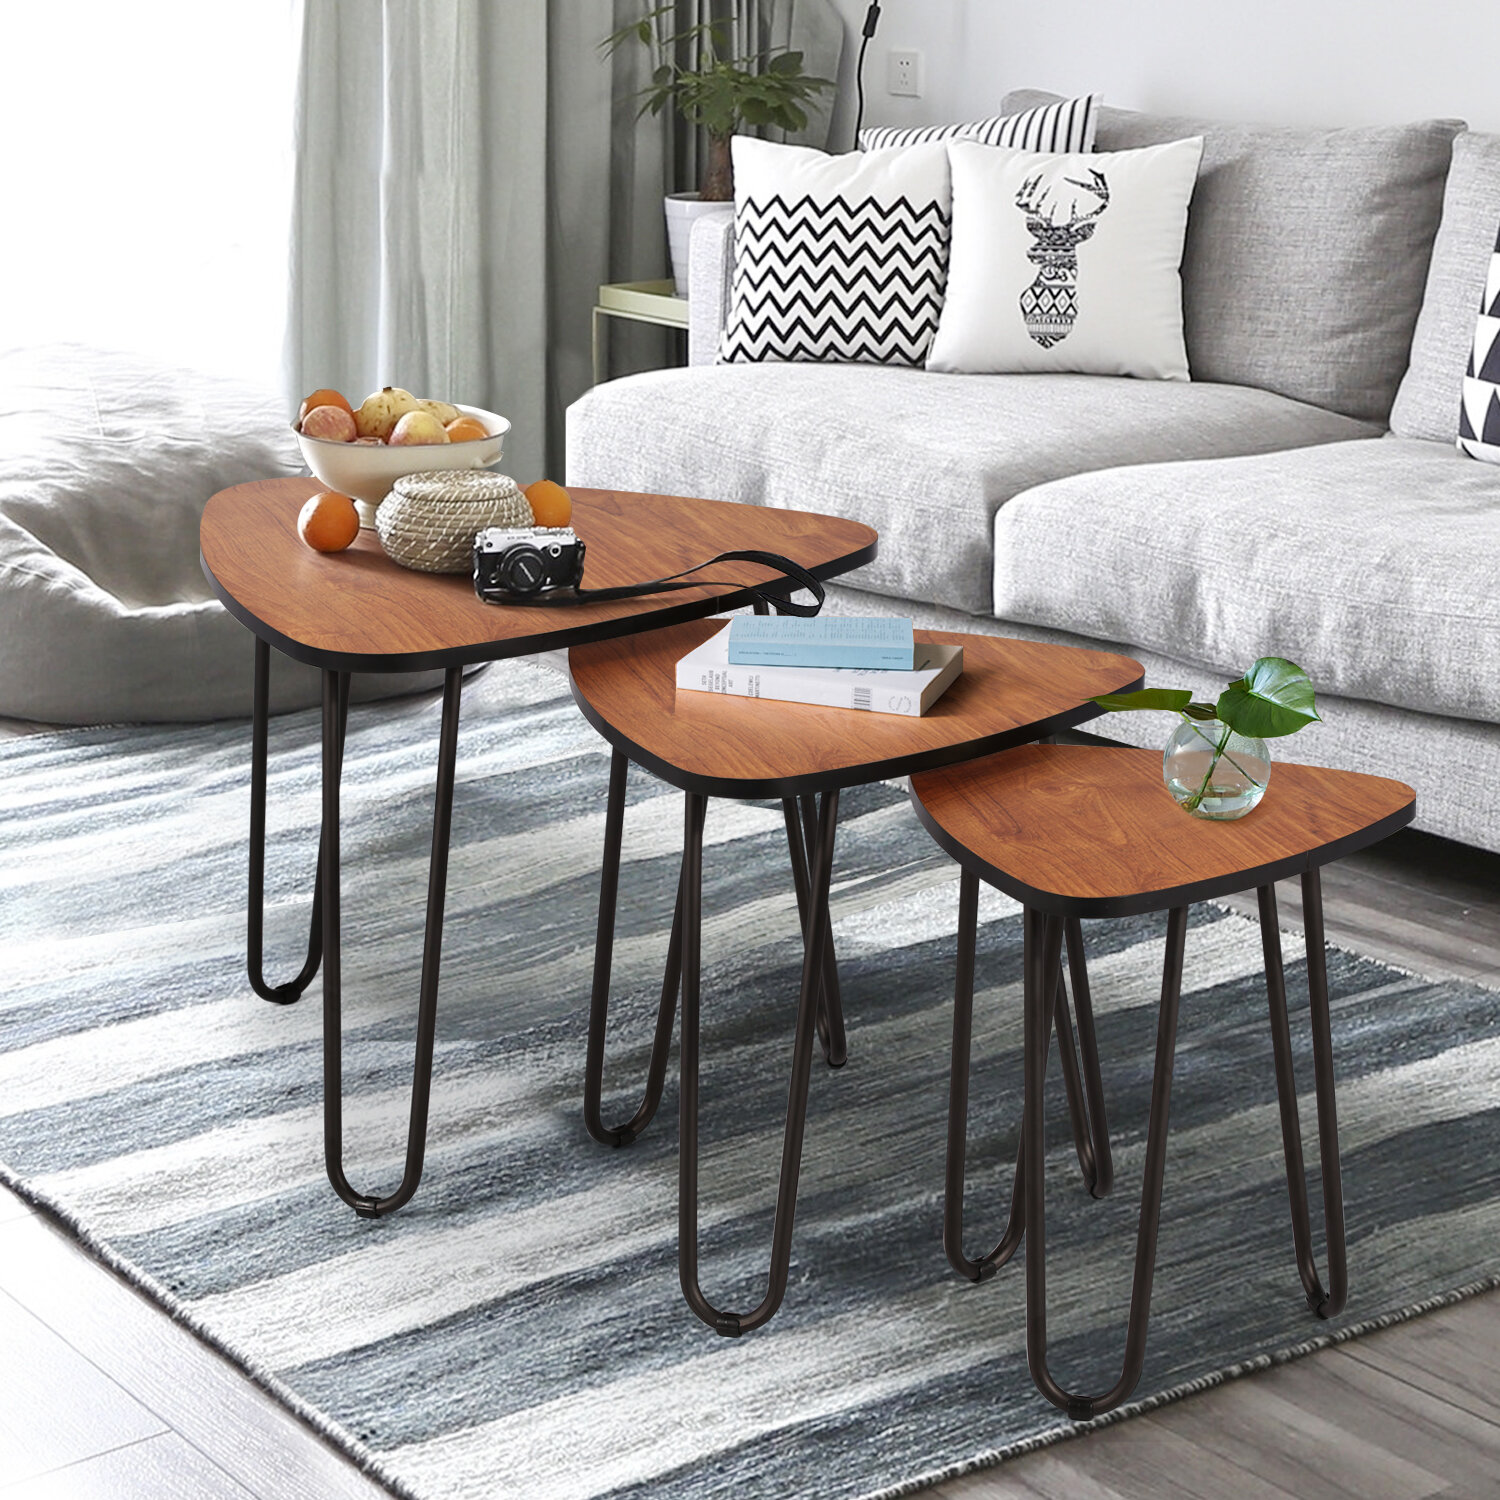 Union Rustic Summerall Nesting Coffee Tables